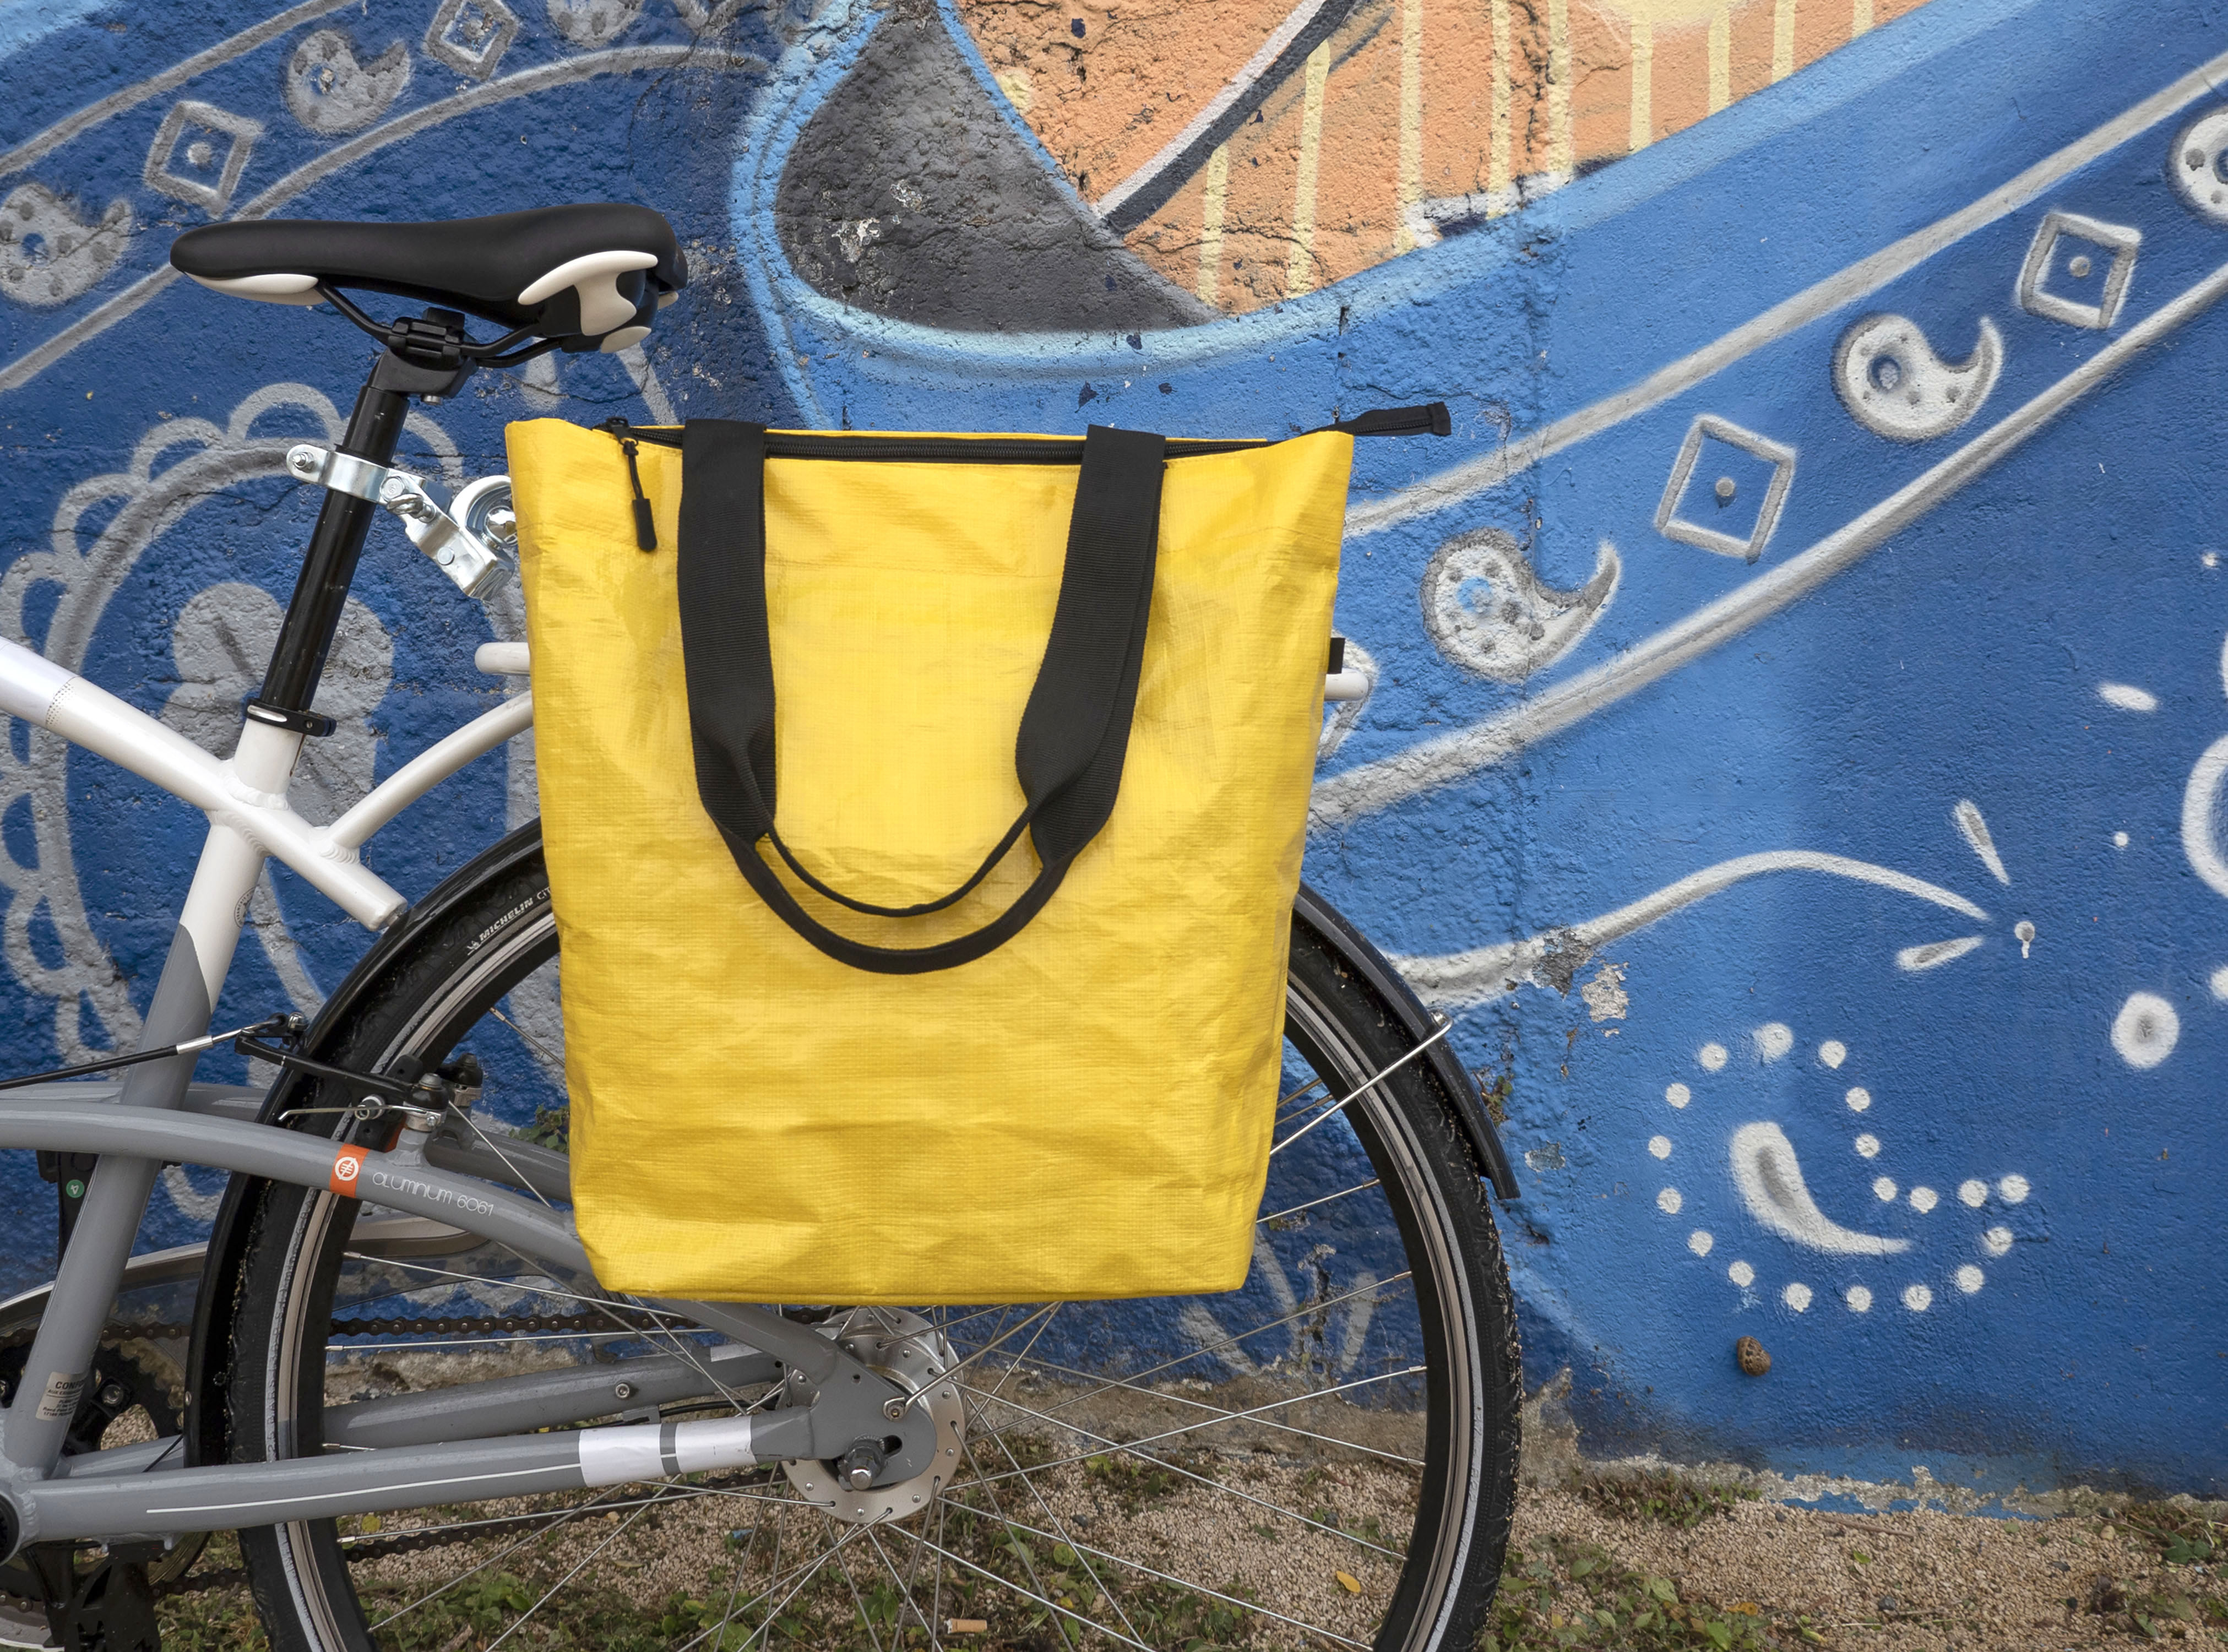 Hapo G SACOCHE ARRIERE PP RECYCLE FIXATION PORTE-BAGAGES - JAUNE